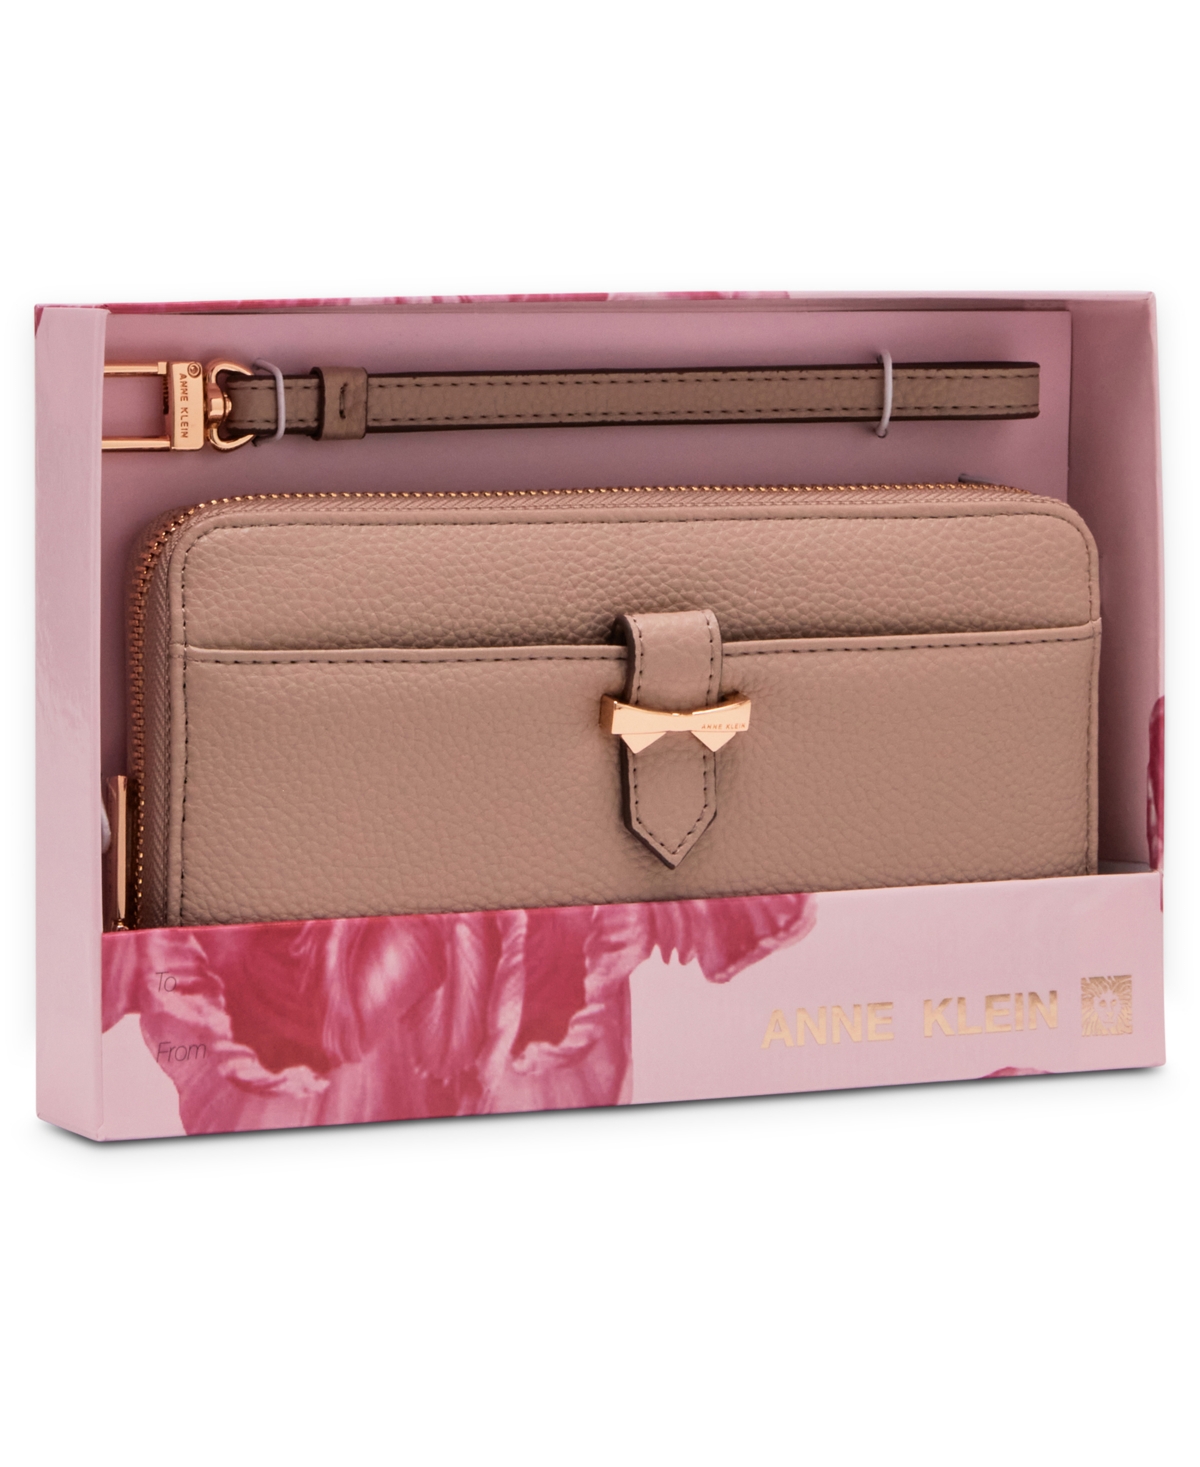 Anne Klein Ak Boxed Slim Zip Wallet With Bow Detail And Wristlet Strap In Pink